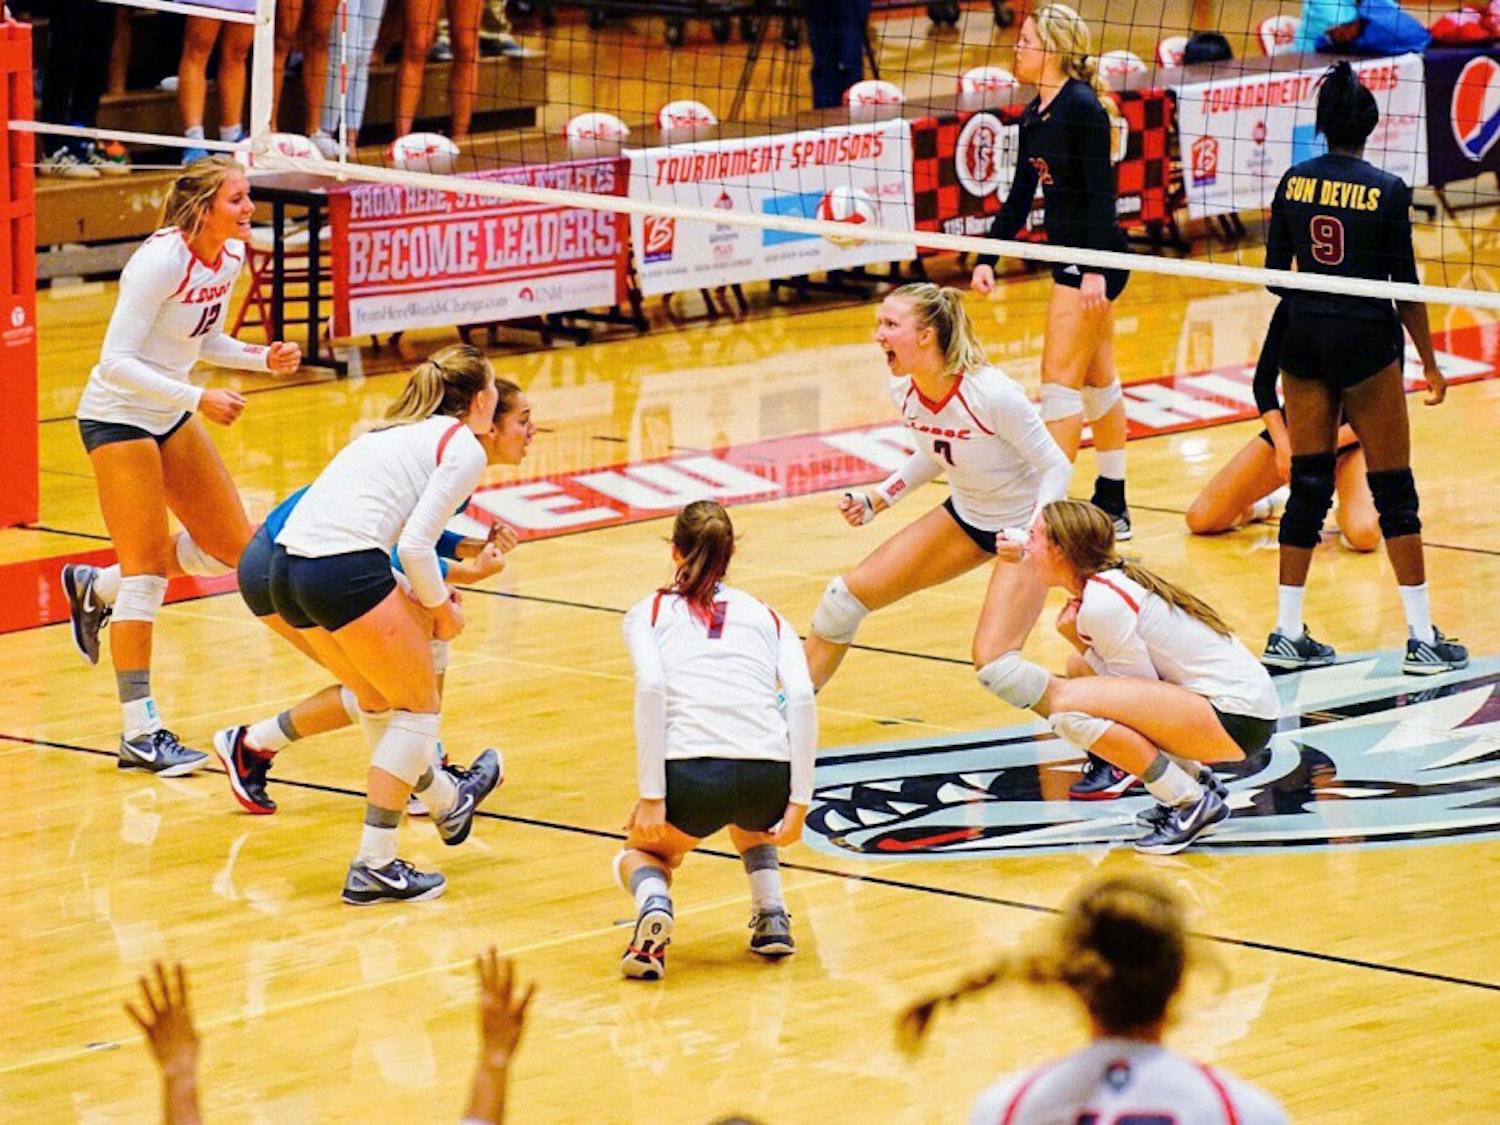 UNM celebrates set point to win the third game of the match against Arizona State on Friday, Aug. 26, 2016 at Johnson Center. The Lobos finished their USF Tournament in Tampa, Florida with a 3-0 victory over Western Carolina.